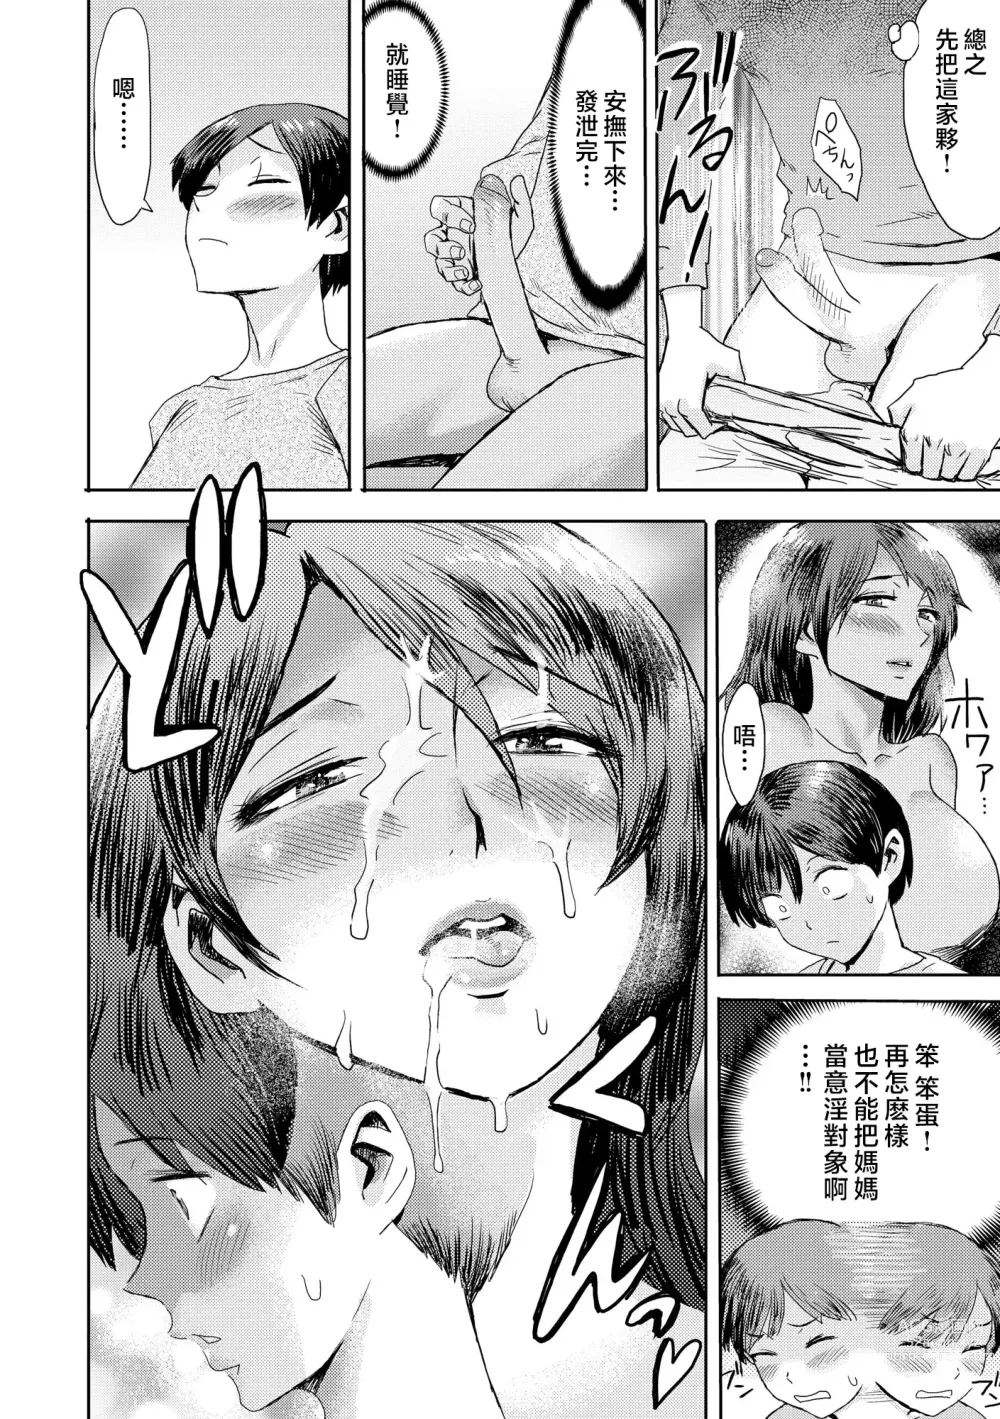 Page 17 of manga Soukan Syndrome (decensored)